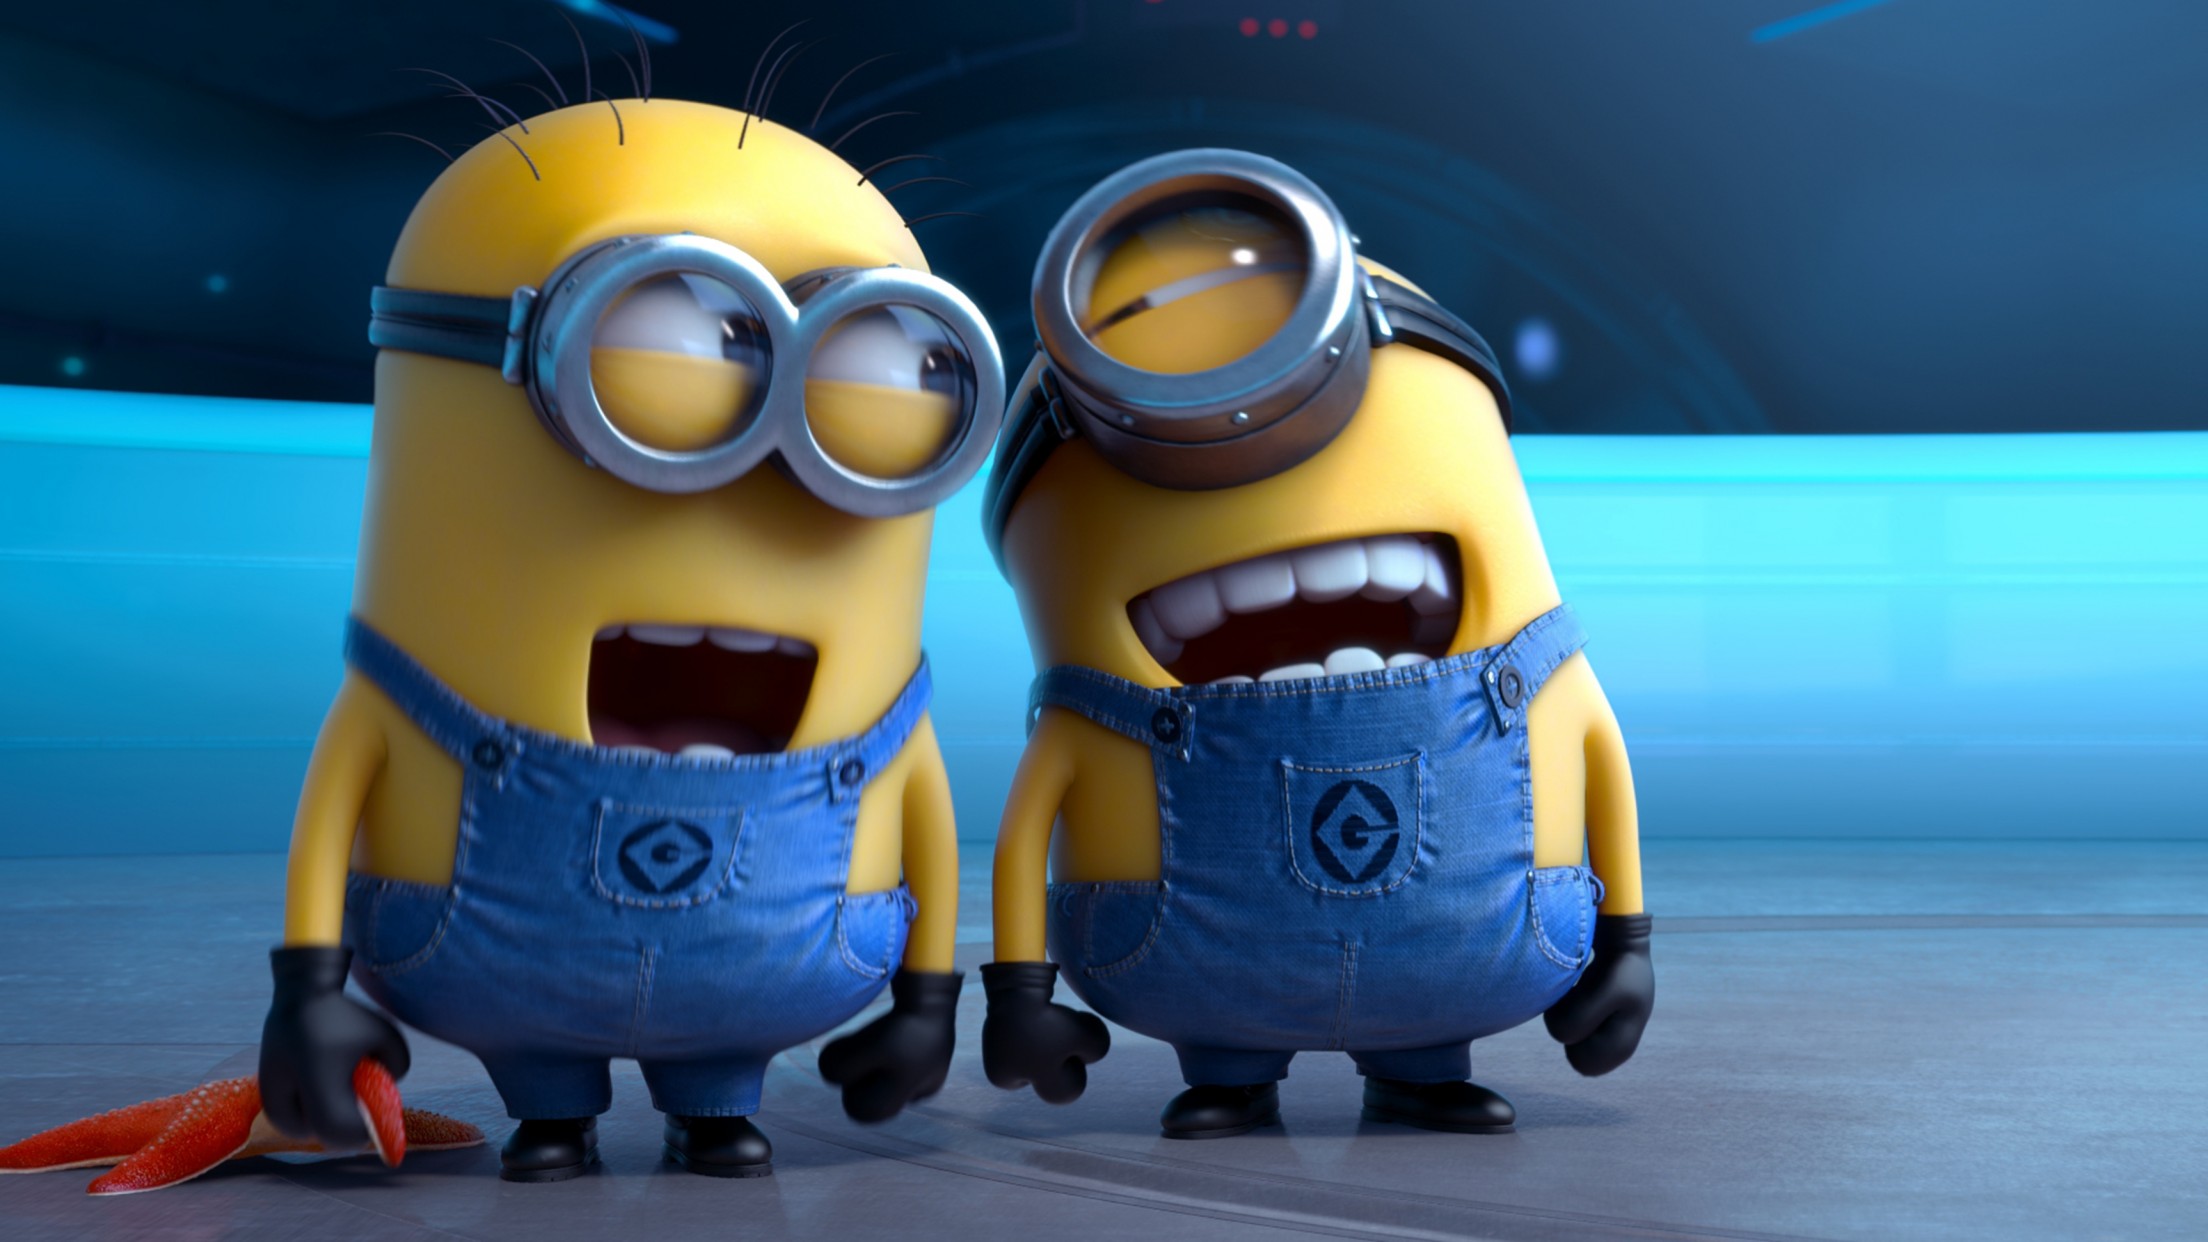 Minions HD Wallpaper For Desktop iPad Android Devices